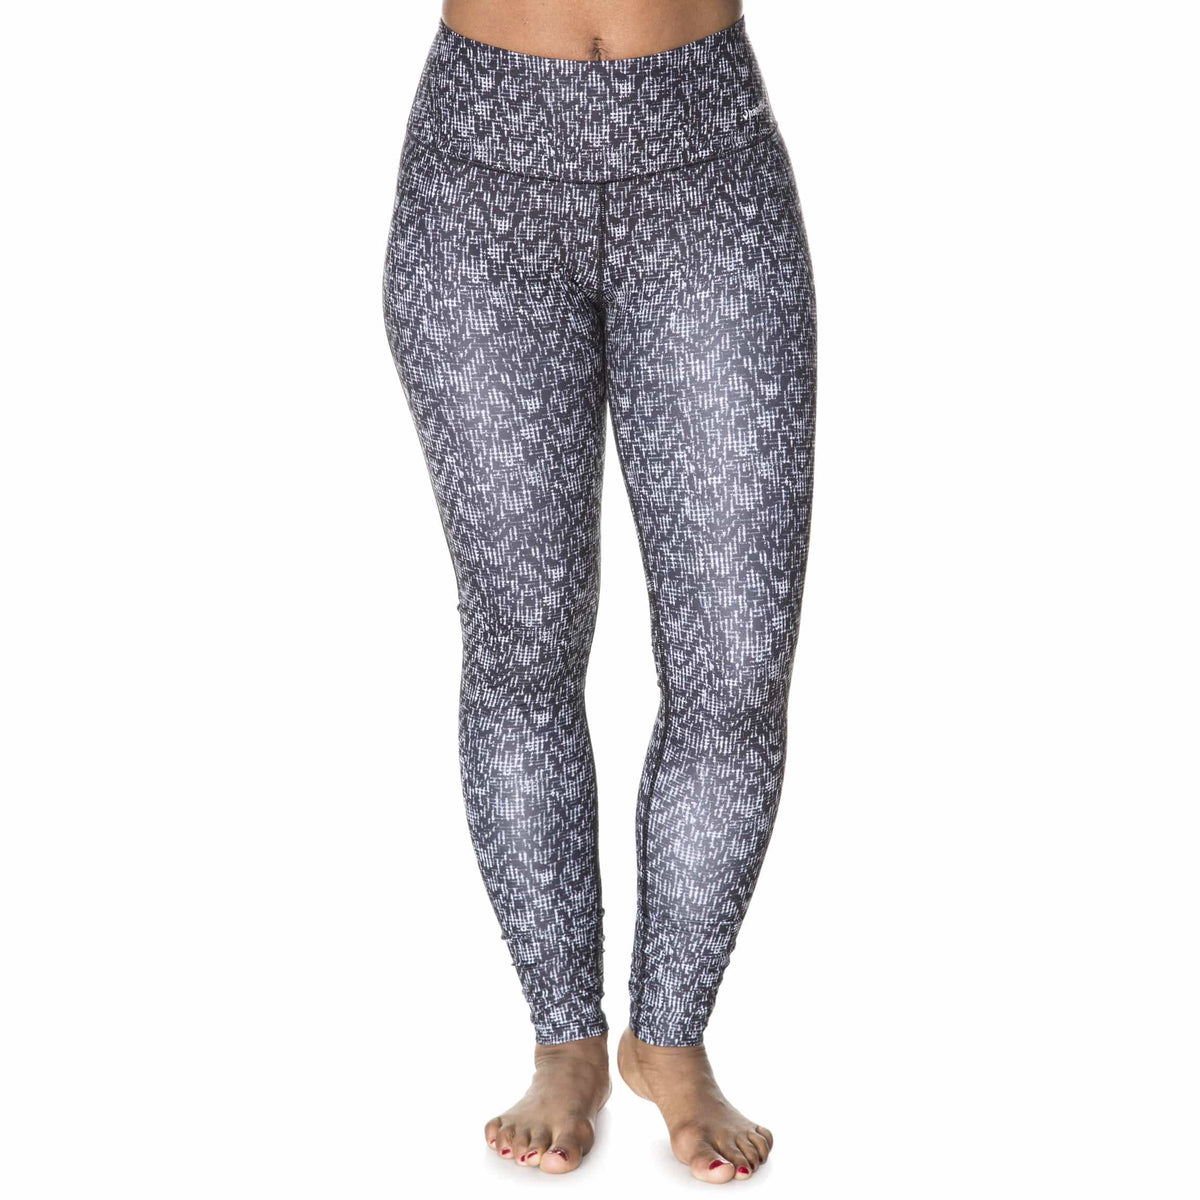 Squeeze Play Legging (High Waist, Full Length) - Off the Grid – Handful